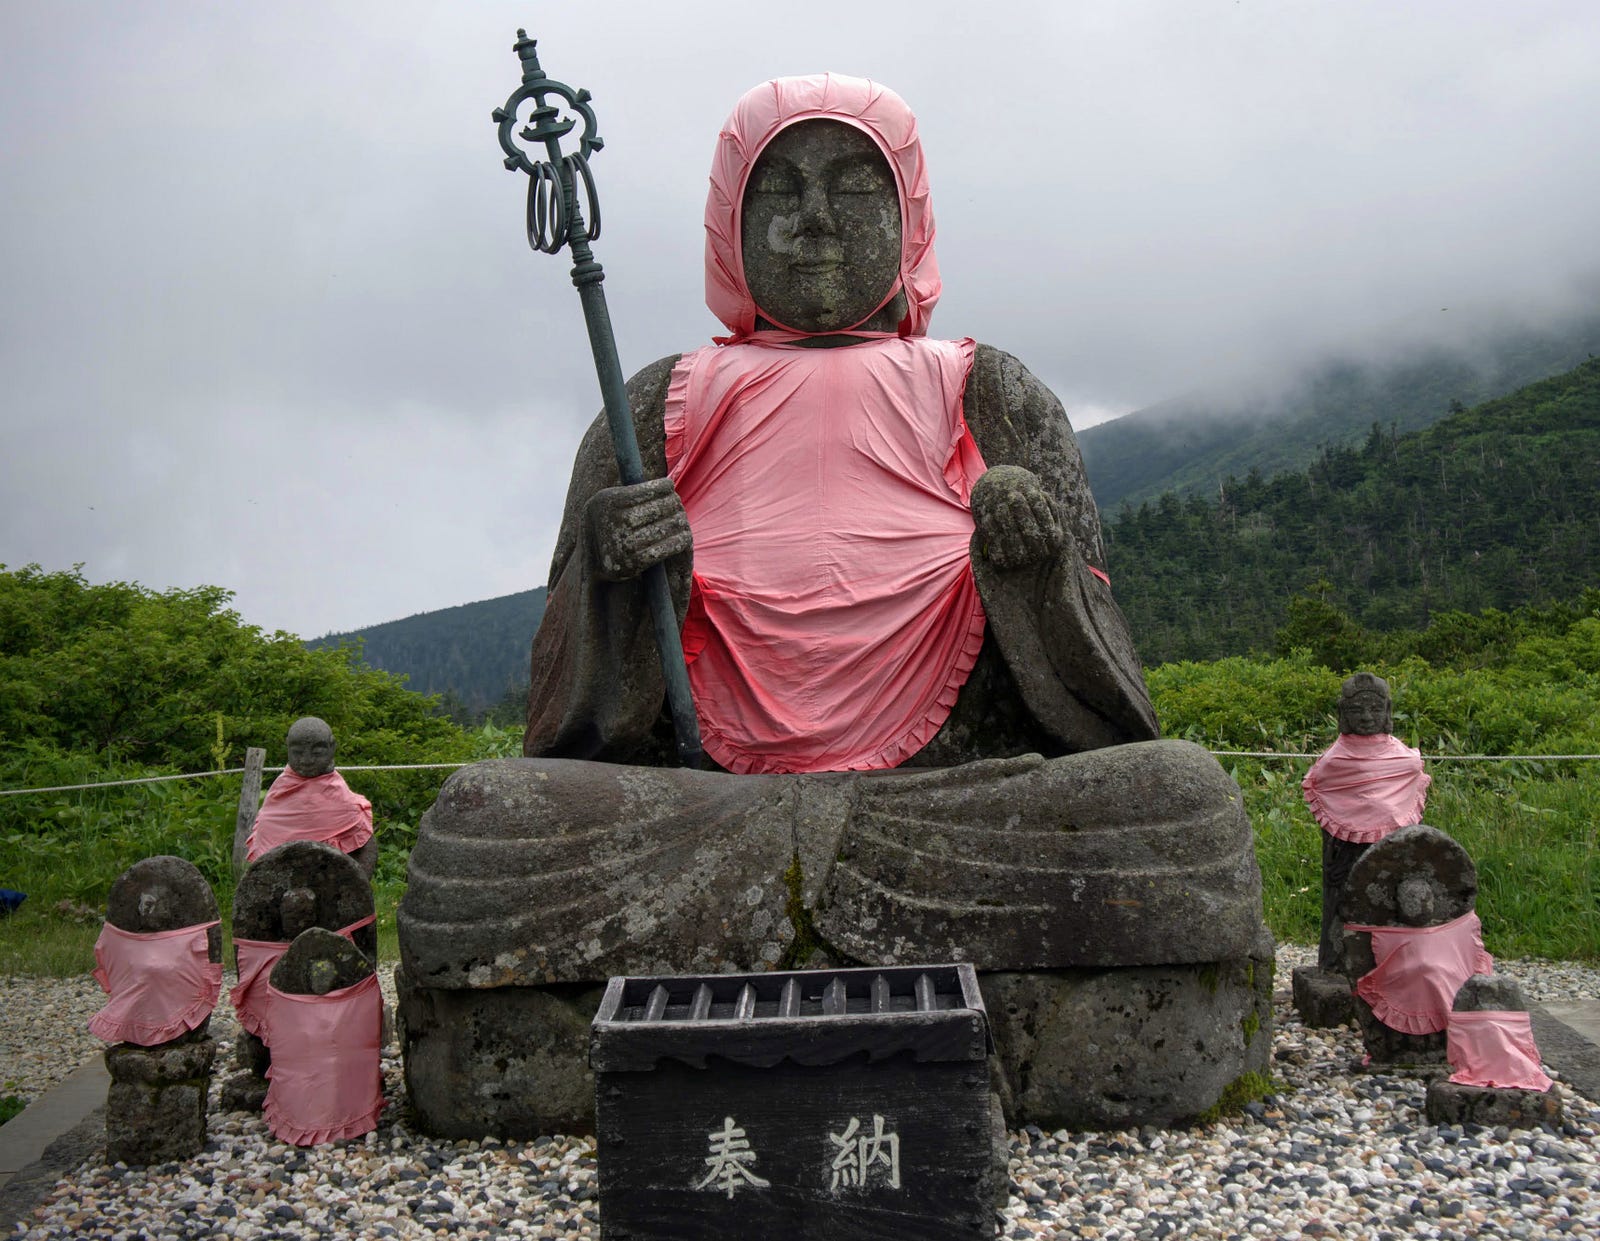 A close-up of the statues of Jizo on Jizo-dake wearing their characteristic red bibs, with a cloudy sky in the background.